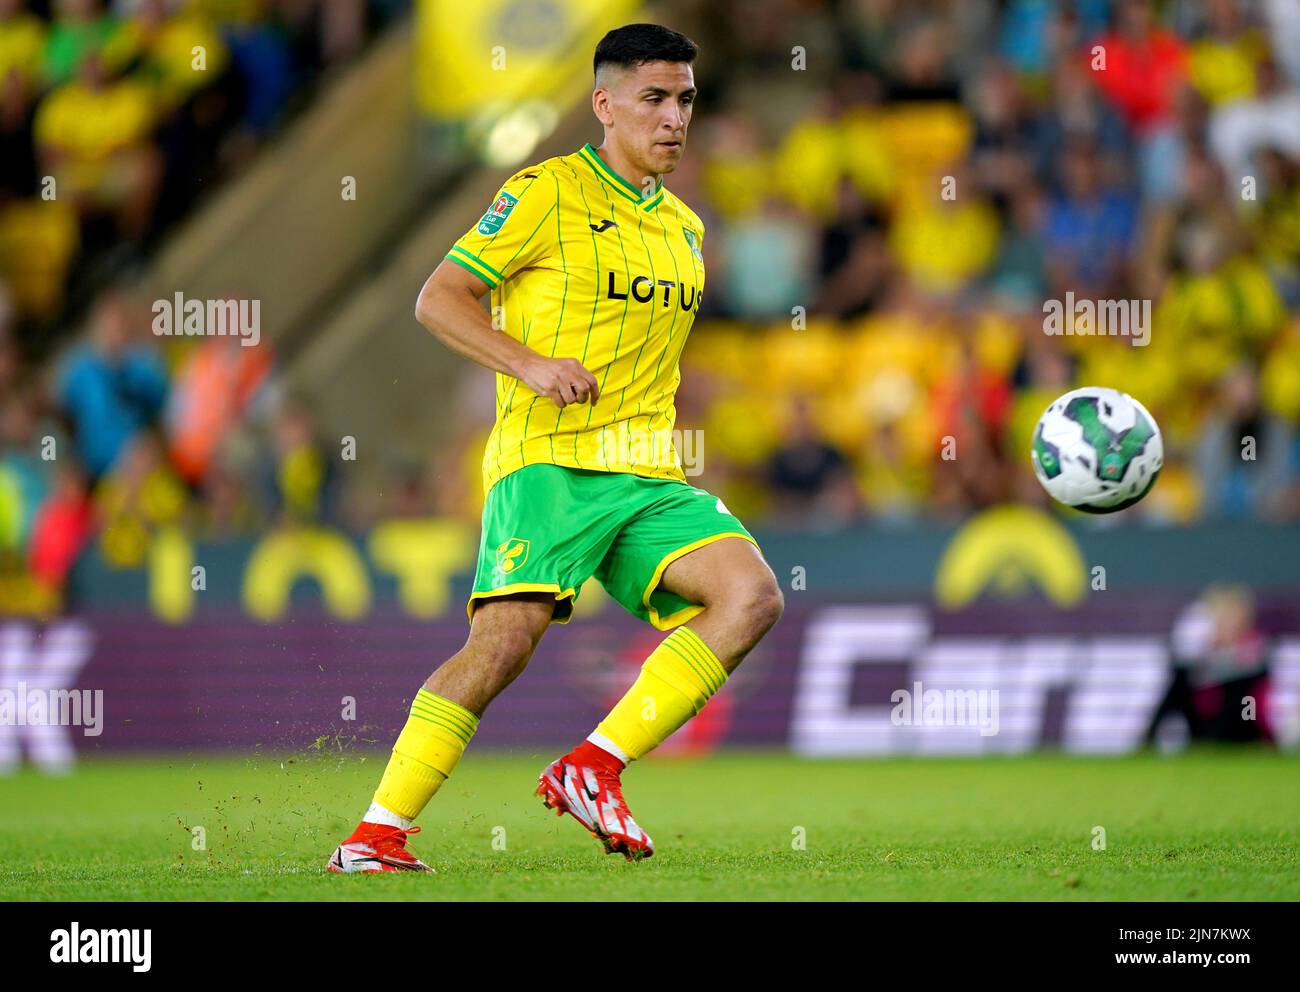 Norwich City's Marcelino Nunez scores during the penalty shoot out of the Carabao Cup, first round match at Carrow Road, Norwich. Picture date: Tuesday August 9, 2022. Stock Photo